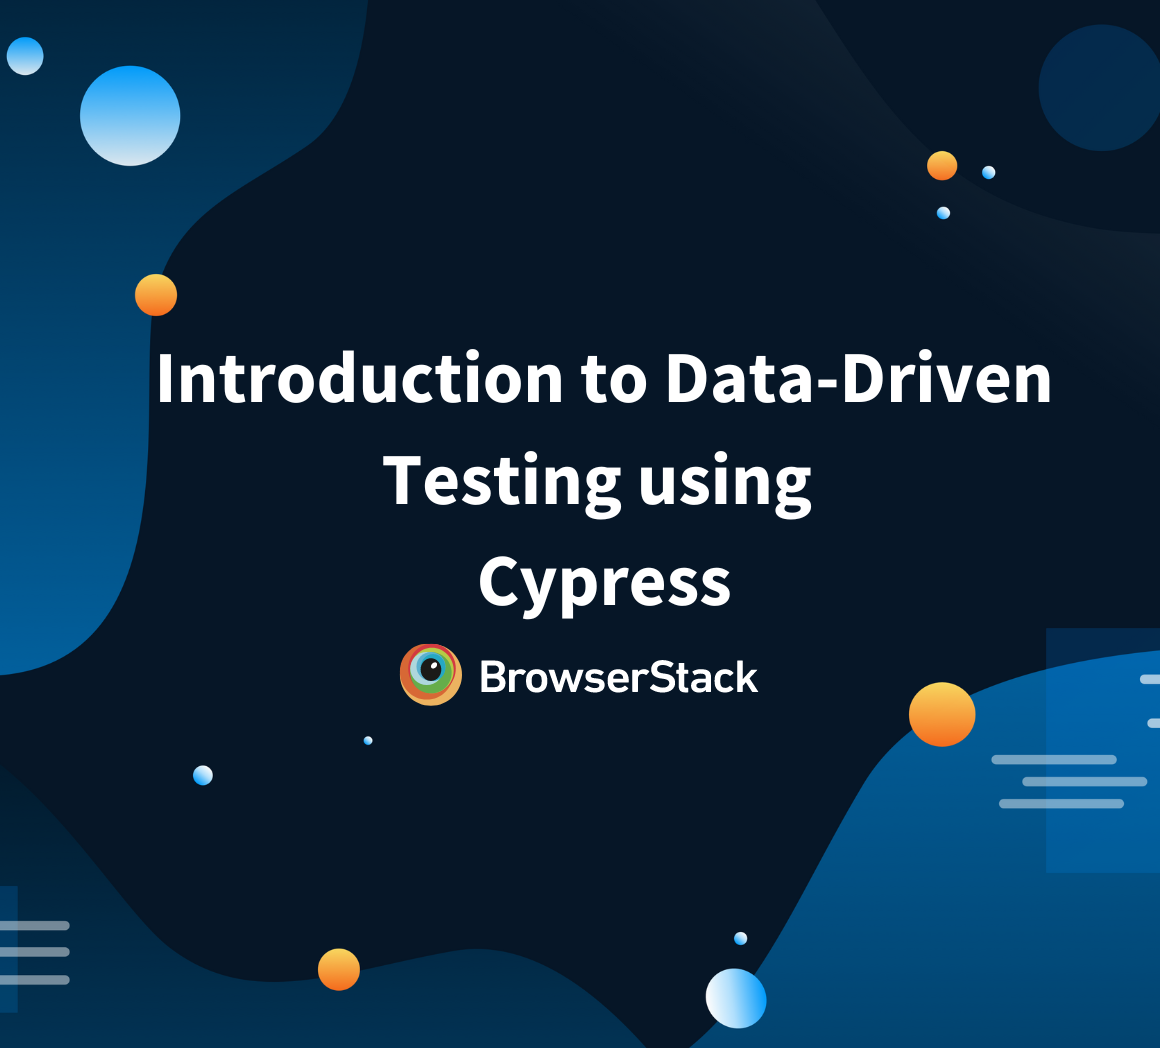 Introduction to Data-Driven Testing using Cypress